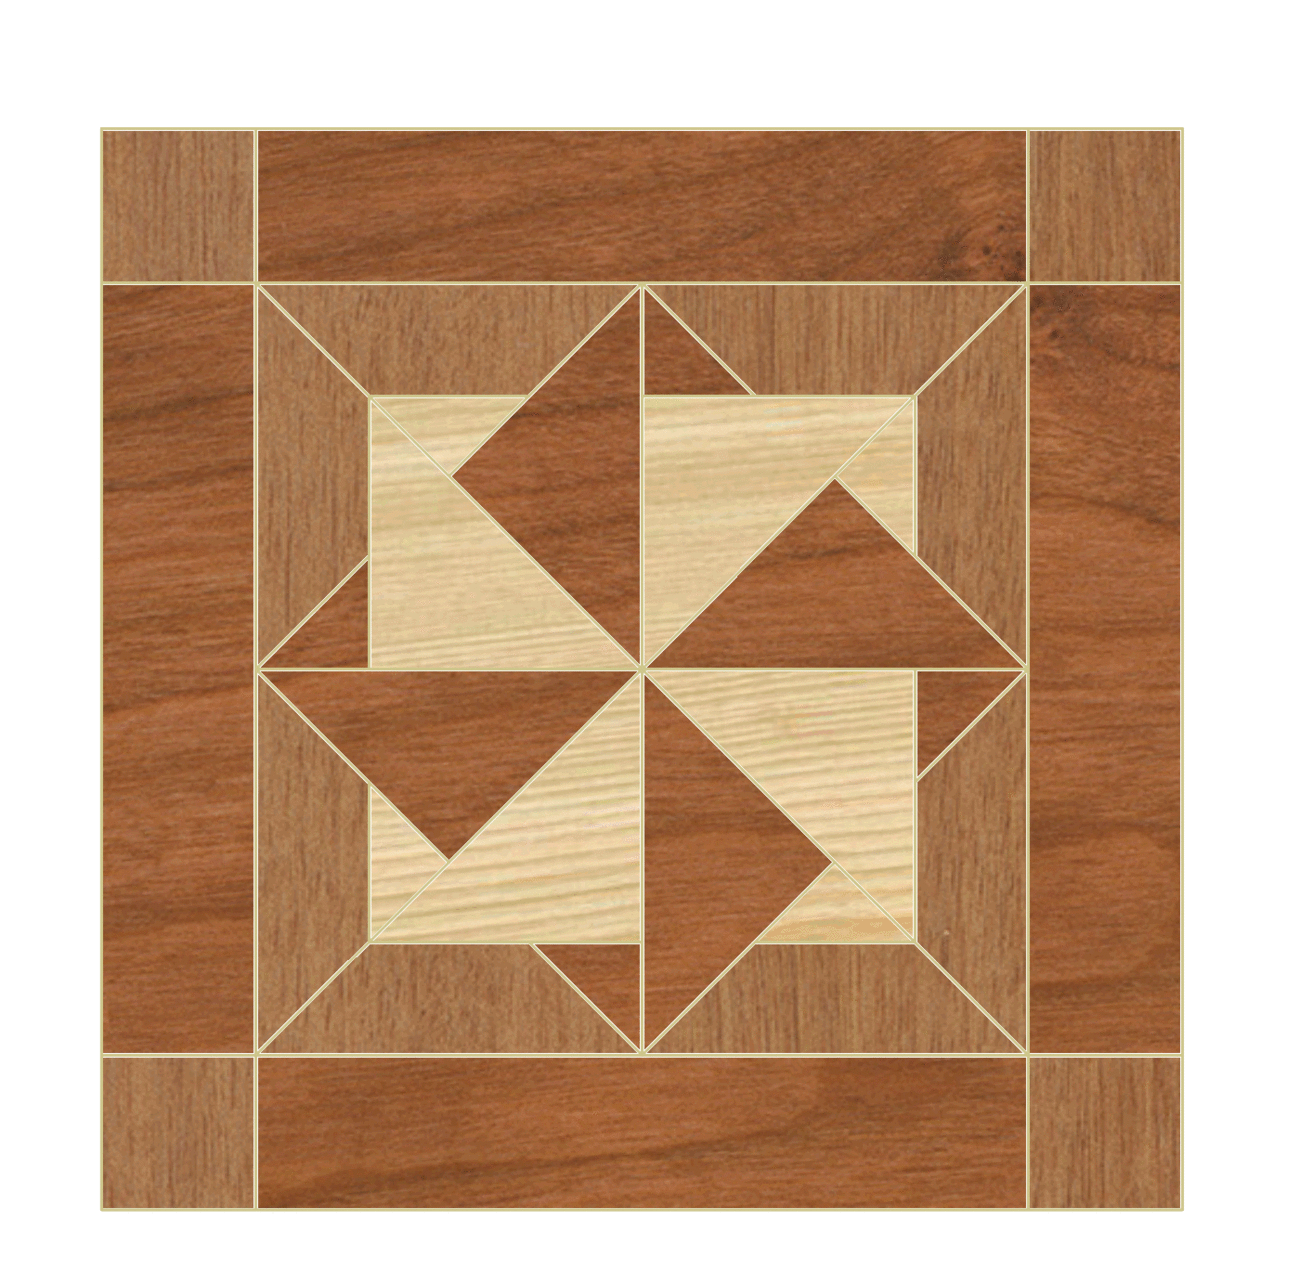 Woodworking patterns.com Main Image